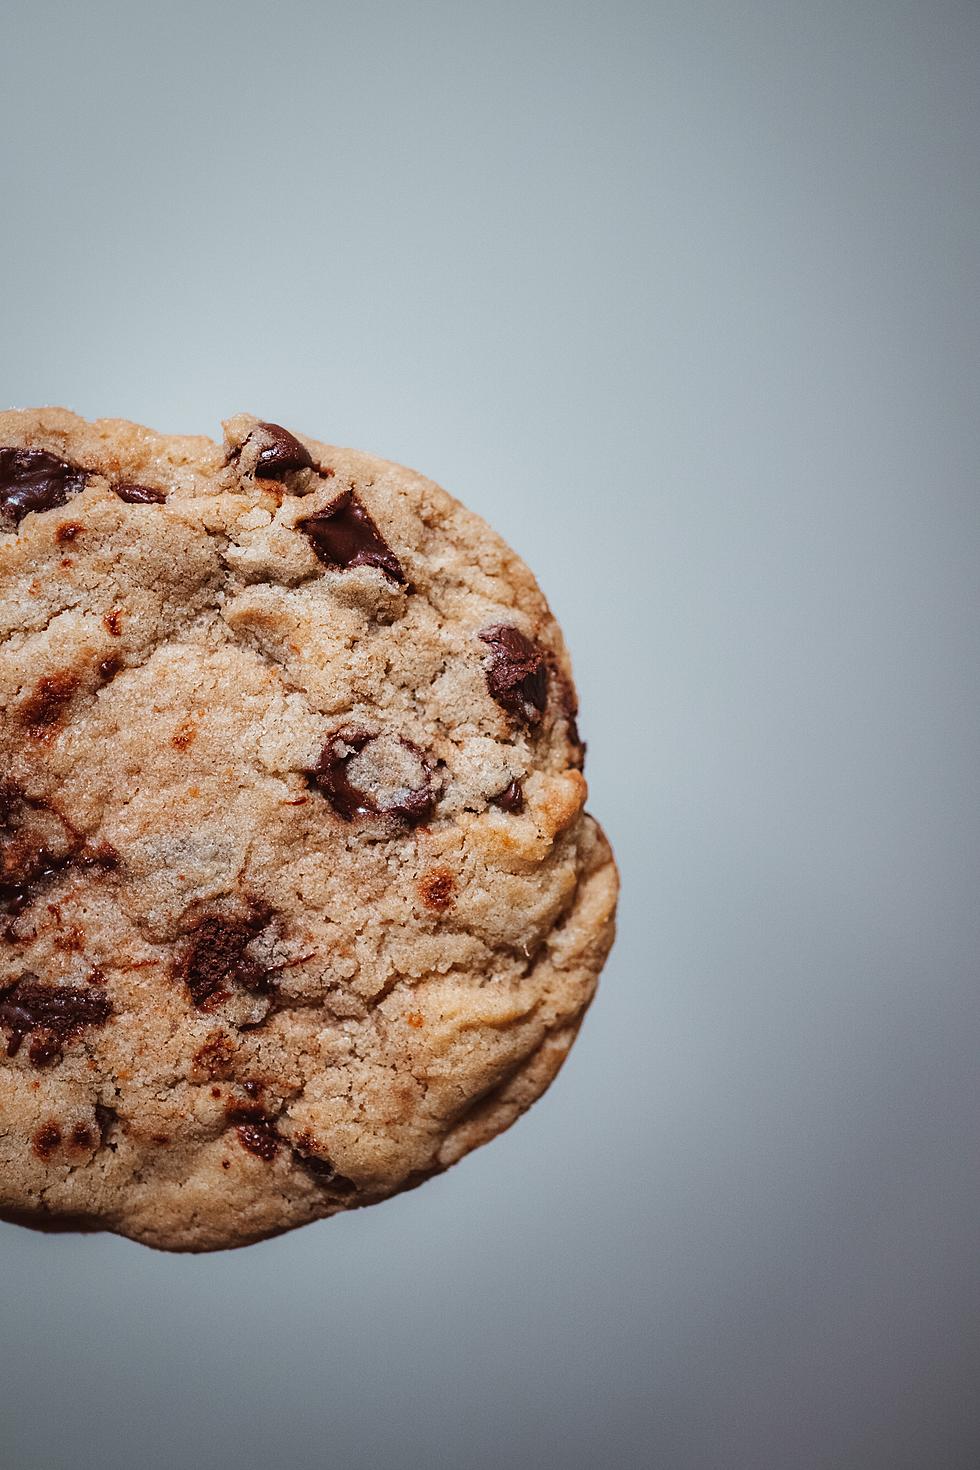 Grab The Milk! Yum It’s New Jersey’s Best Cookie